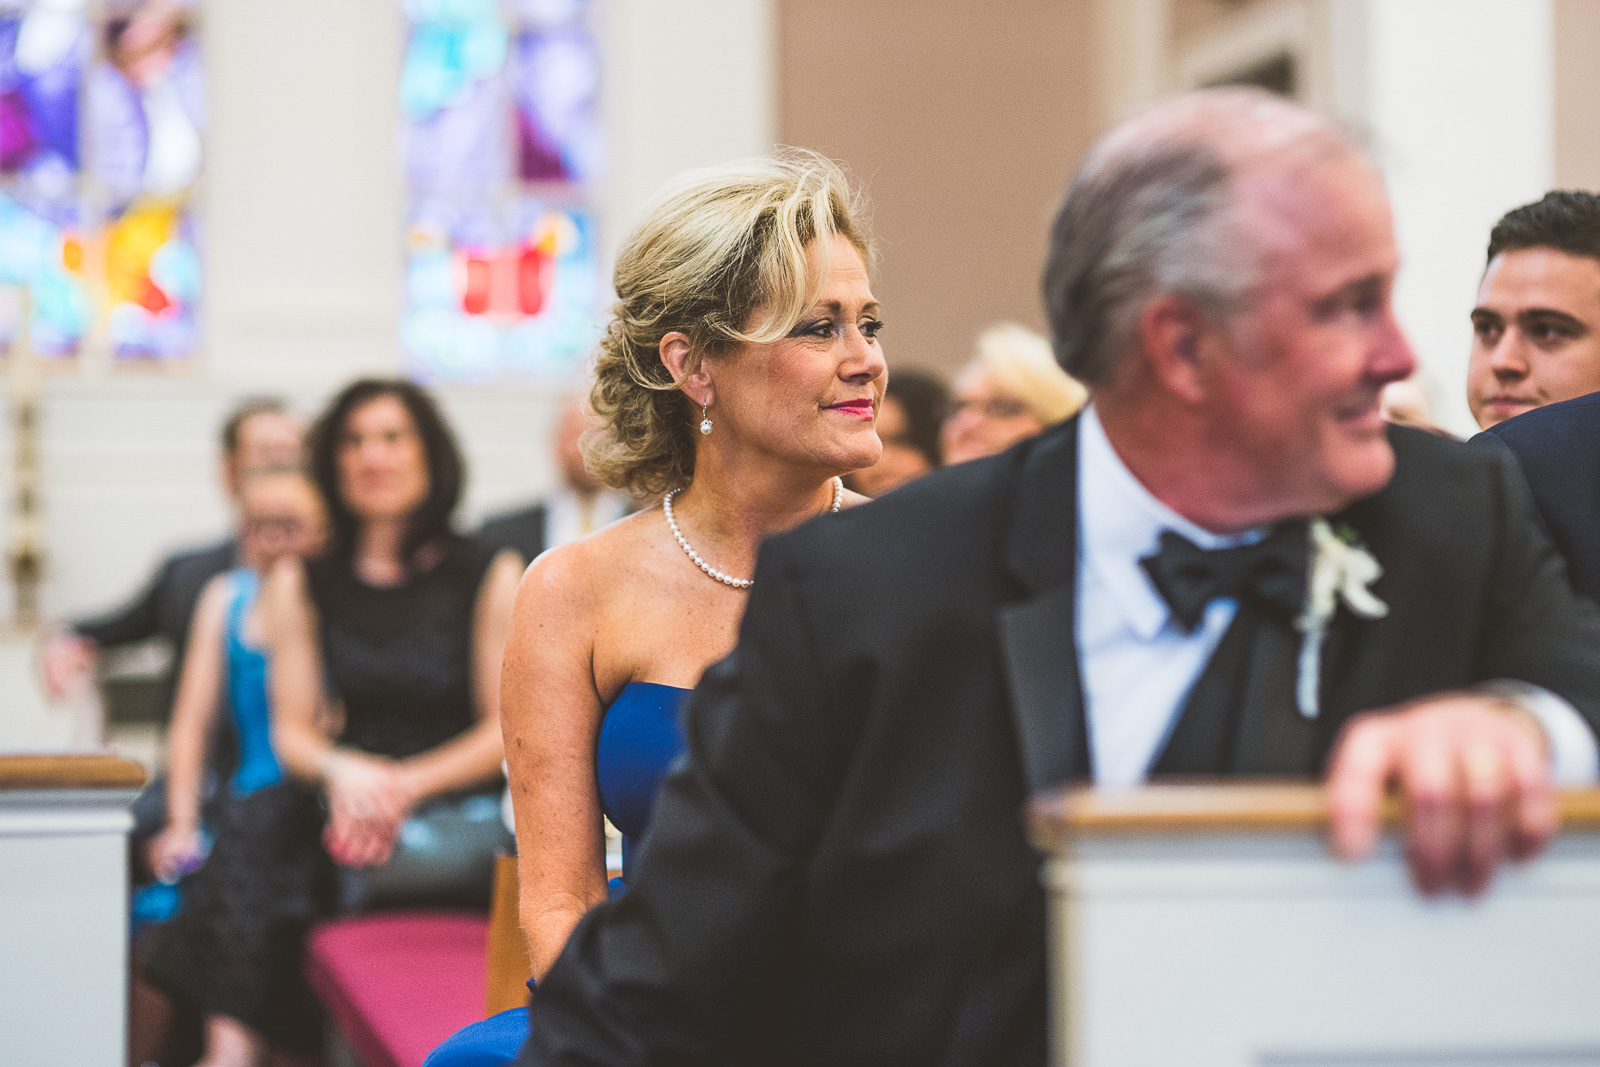 31 parents looking at bride - Kristina + Dave // Wedding Photographer in Chicago